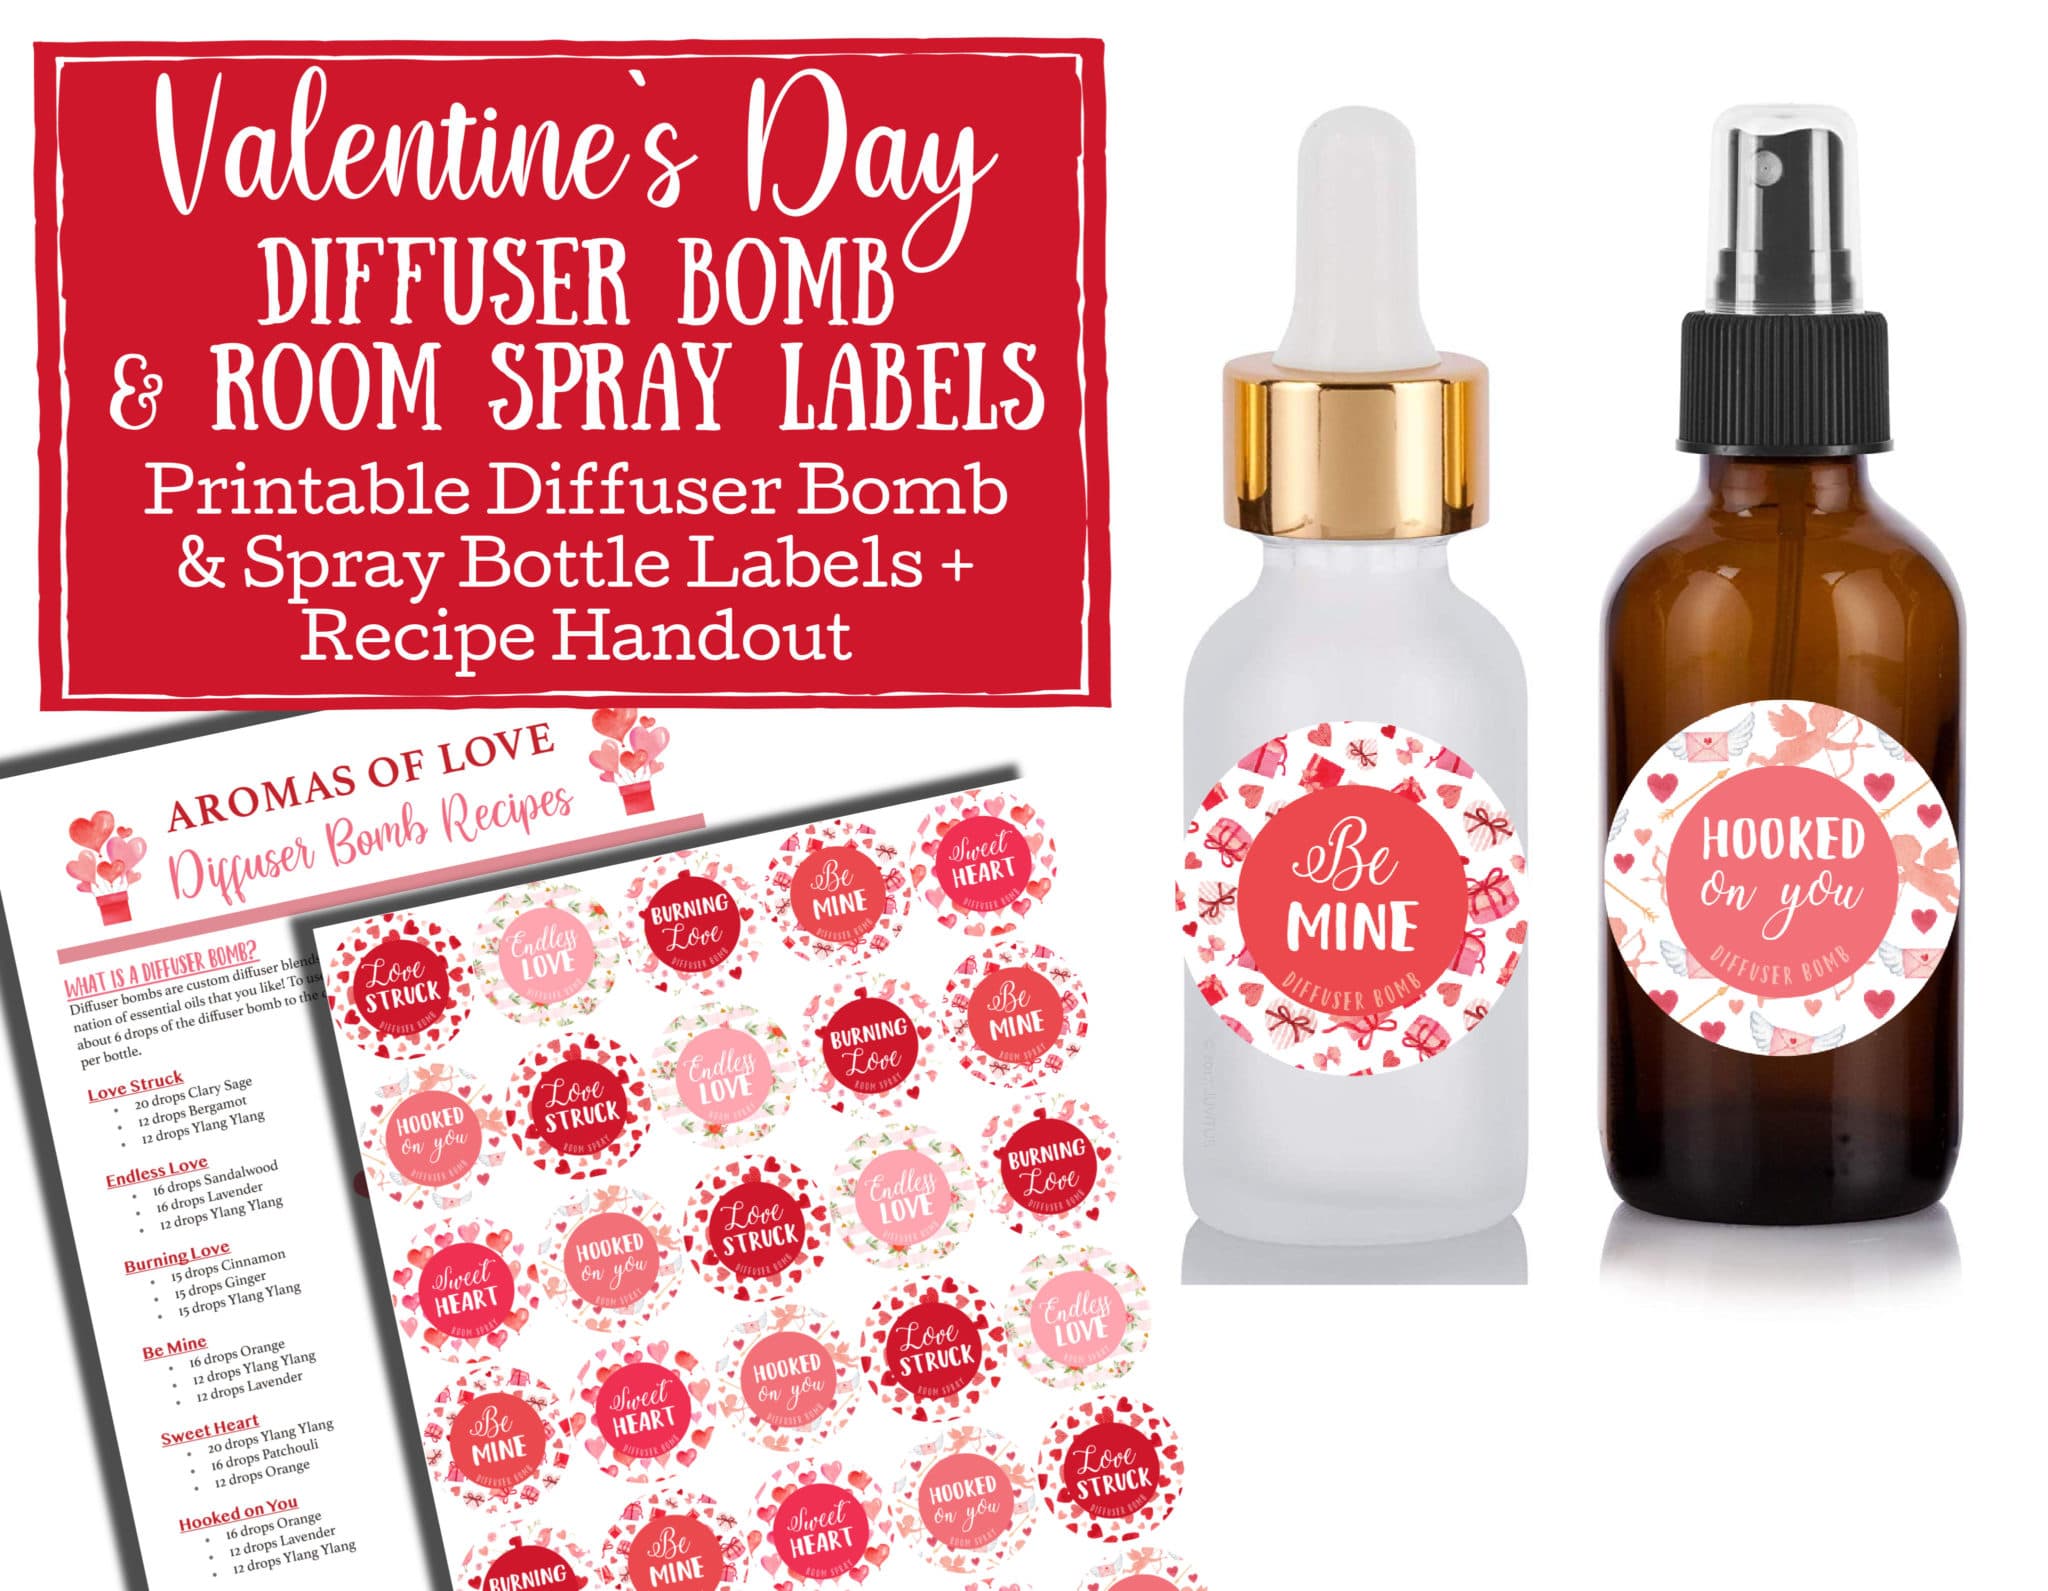 Valentine's Day Diffuser Bomb and Room Spray Labels using pure essential oils